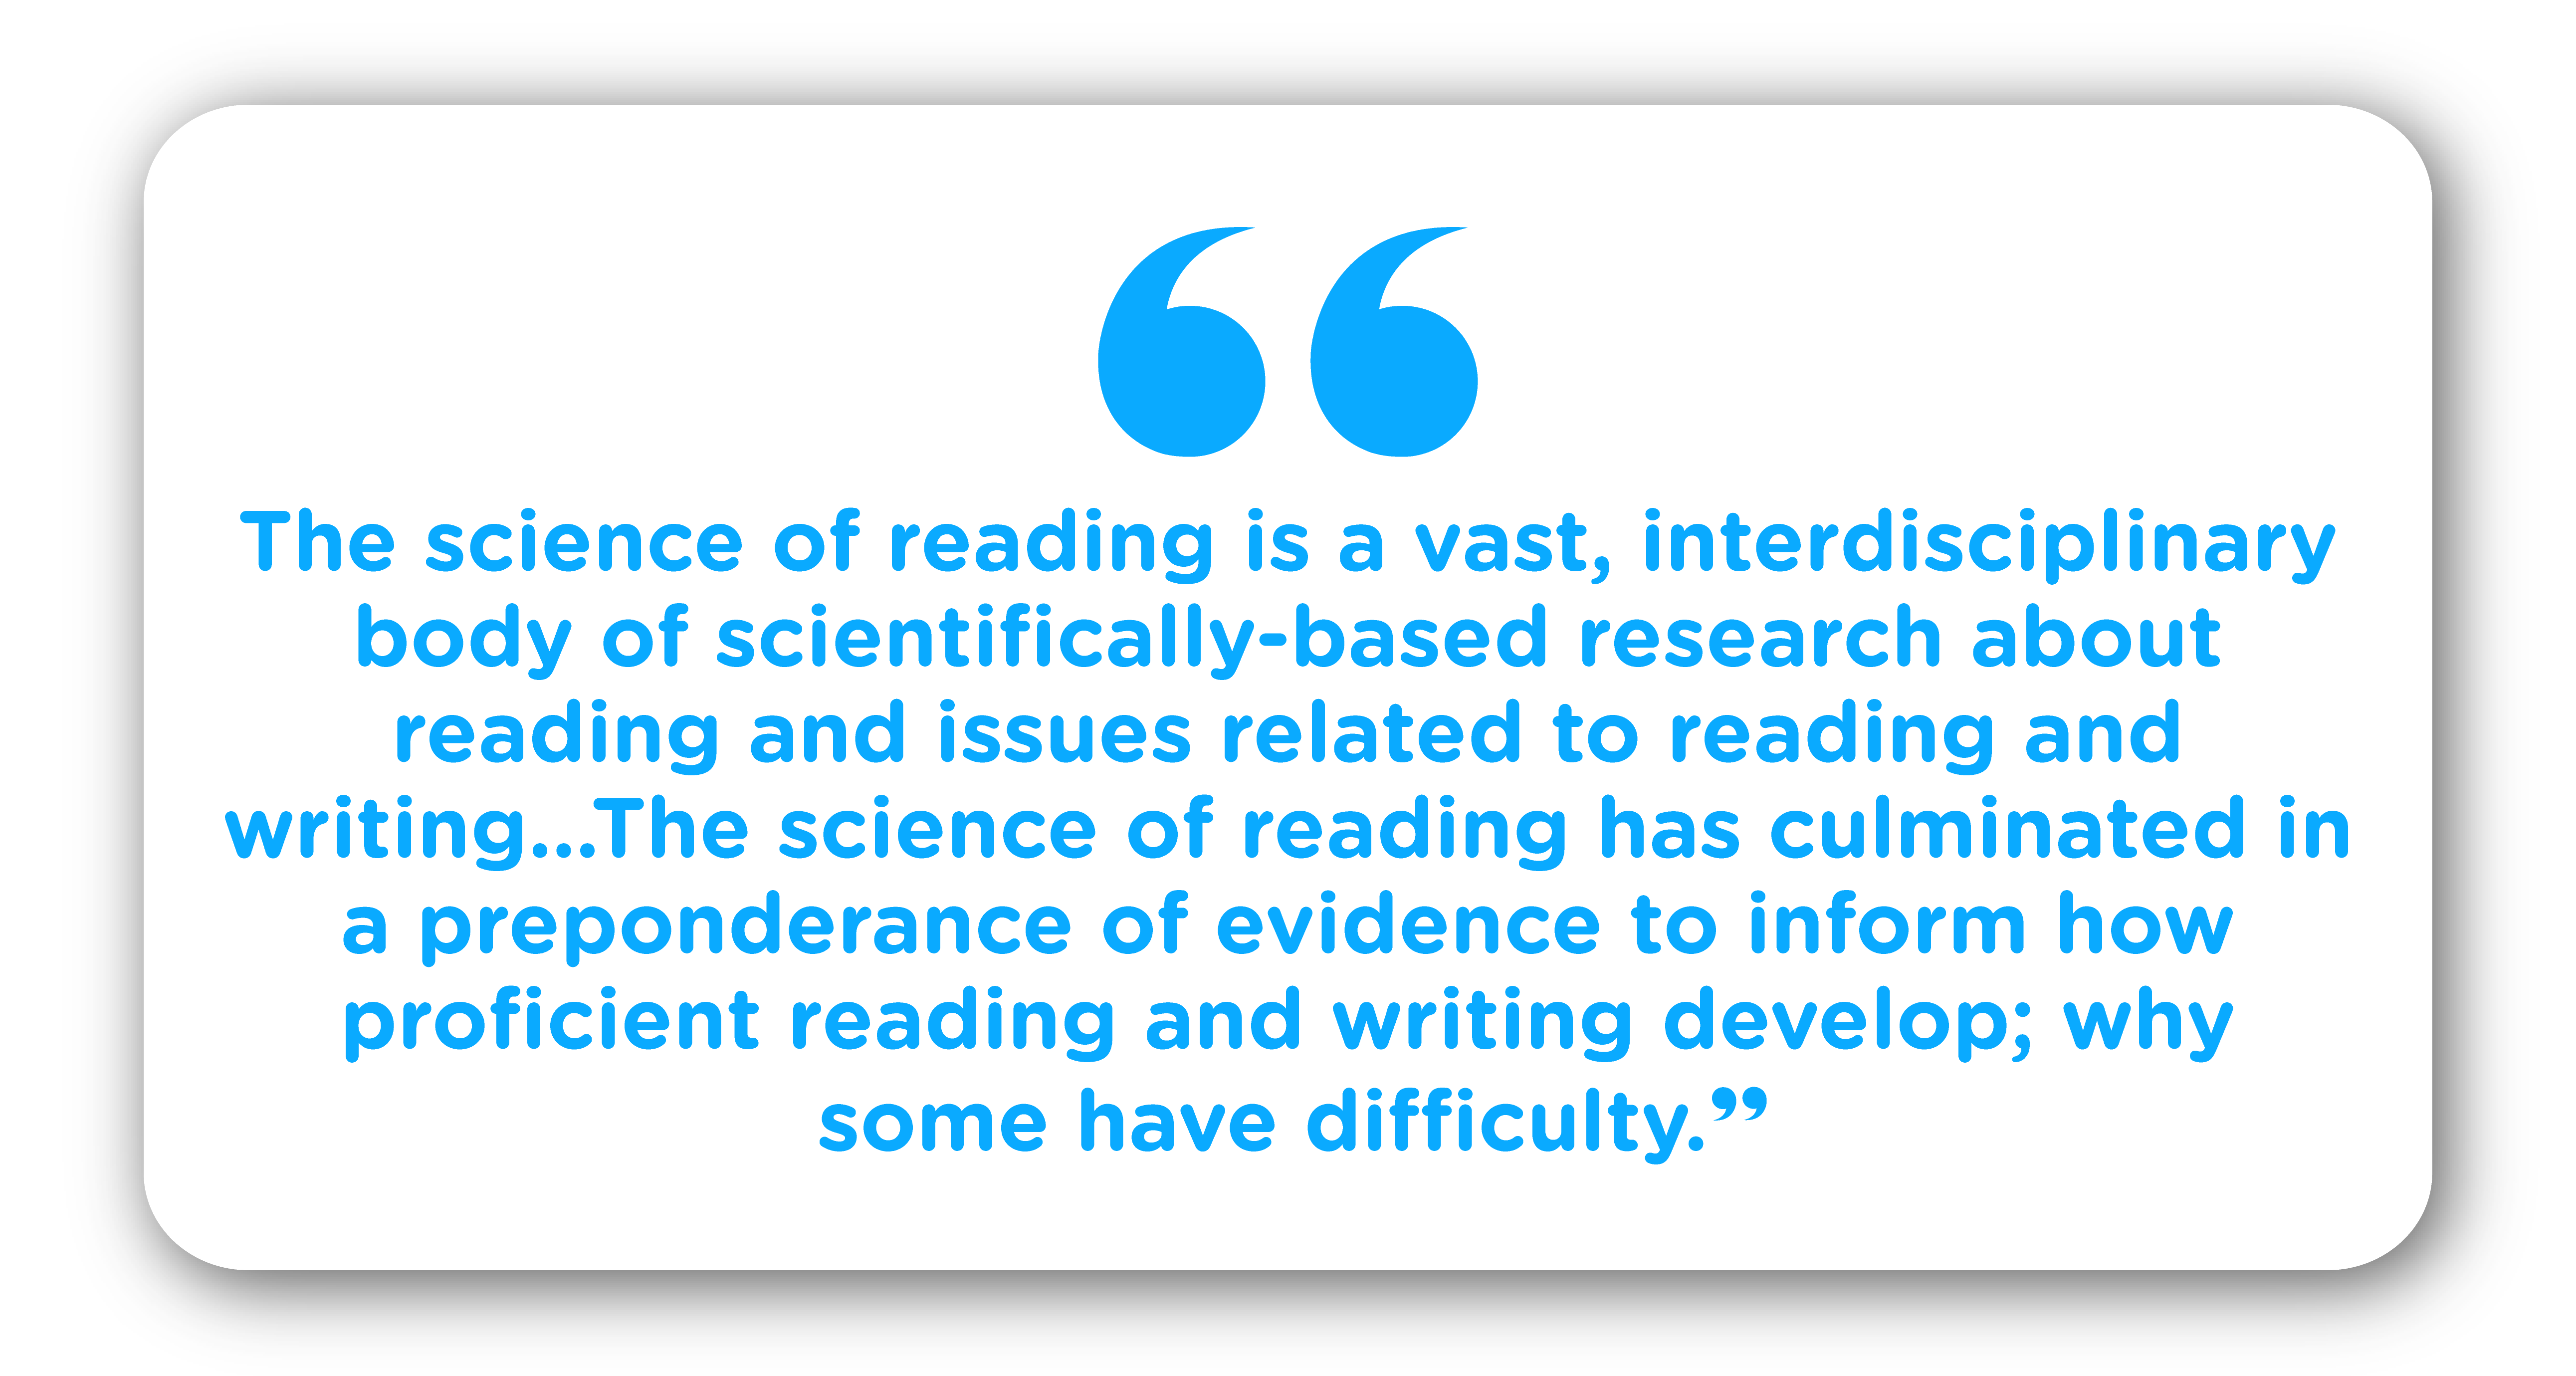 “The science of reading is a vast, interdisciplinary body of scientifically-based research about reading and issues related to reading and writing...The science of reading has culminated in a preponderance of evidence to inform how proficient reading and writing develop; why some have difficulty.”